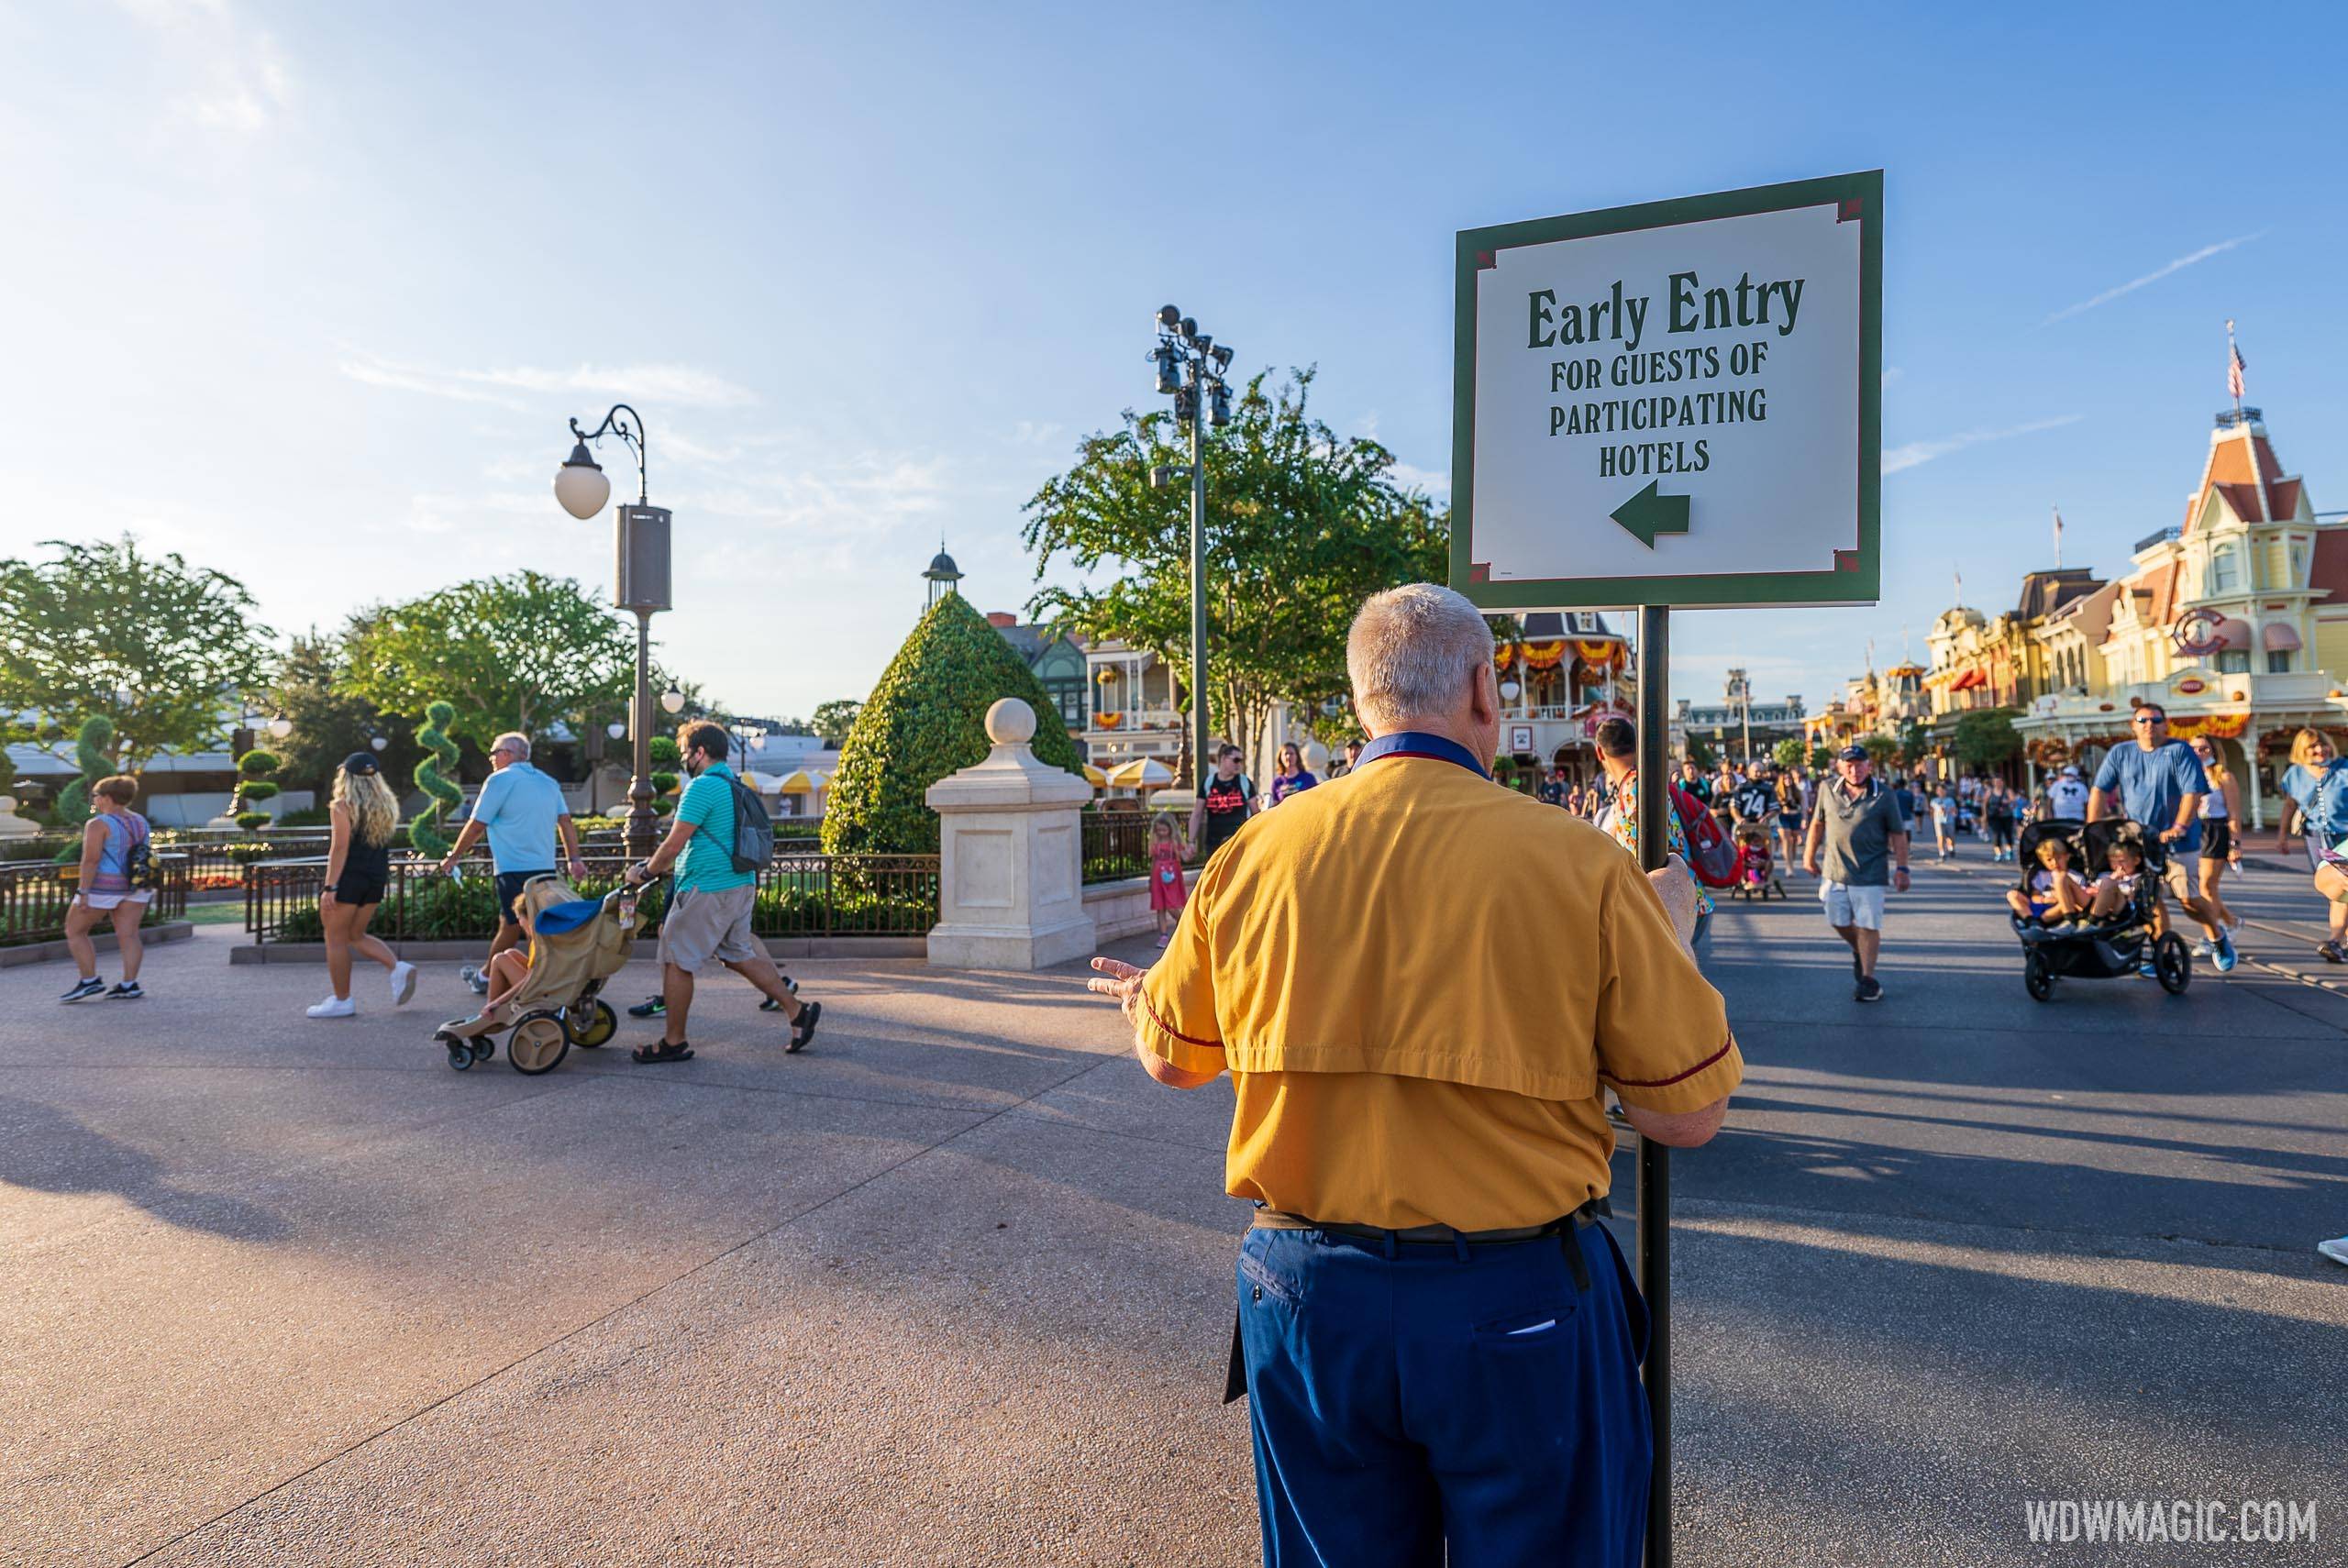 Walt Disney World Resort hotel guests head to Tomorrowland and Fantasyland for Early Entry